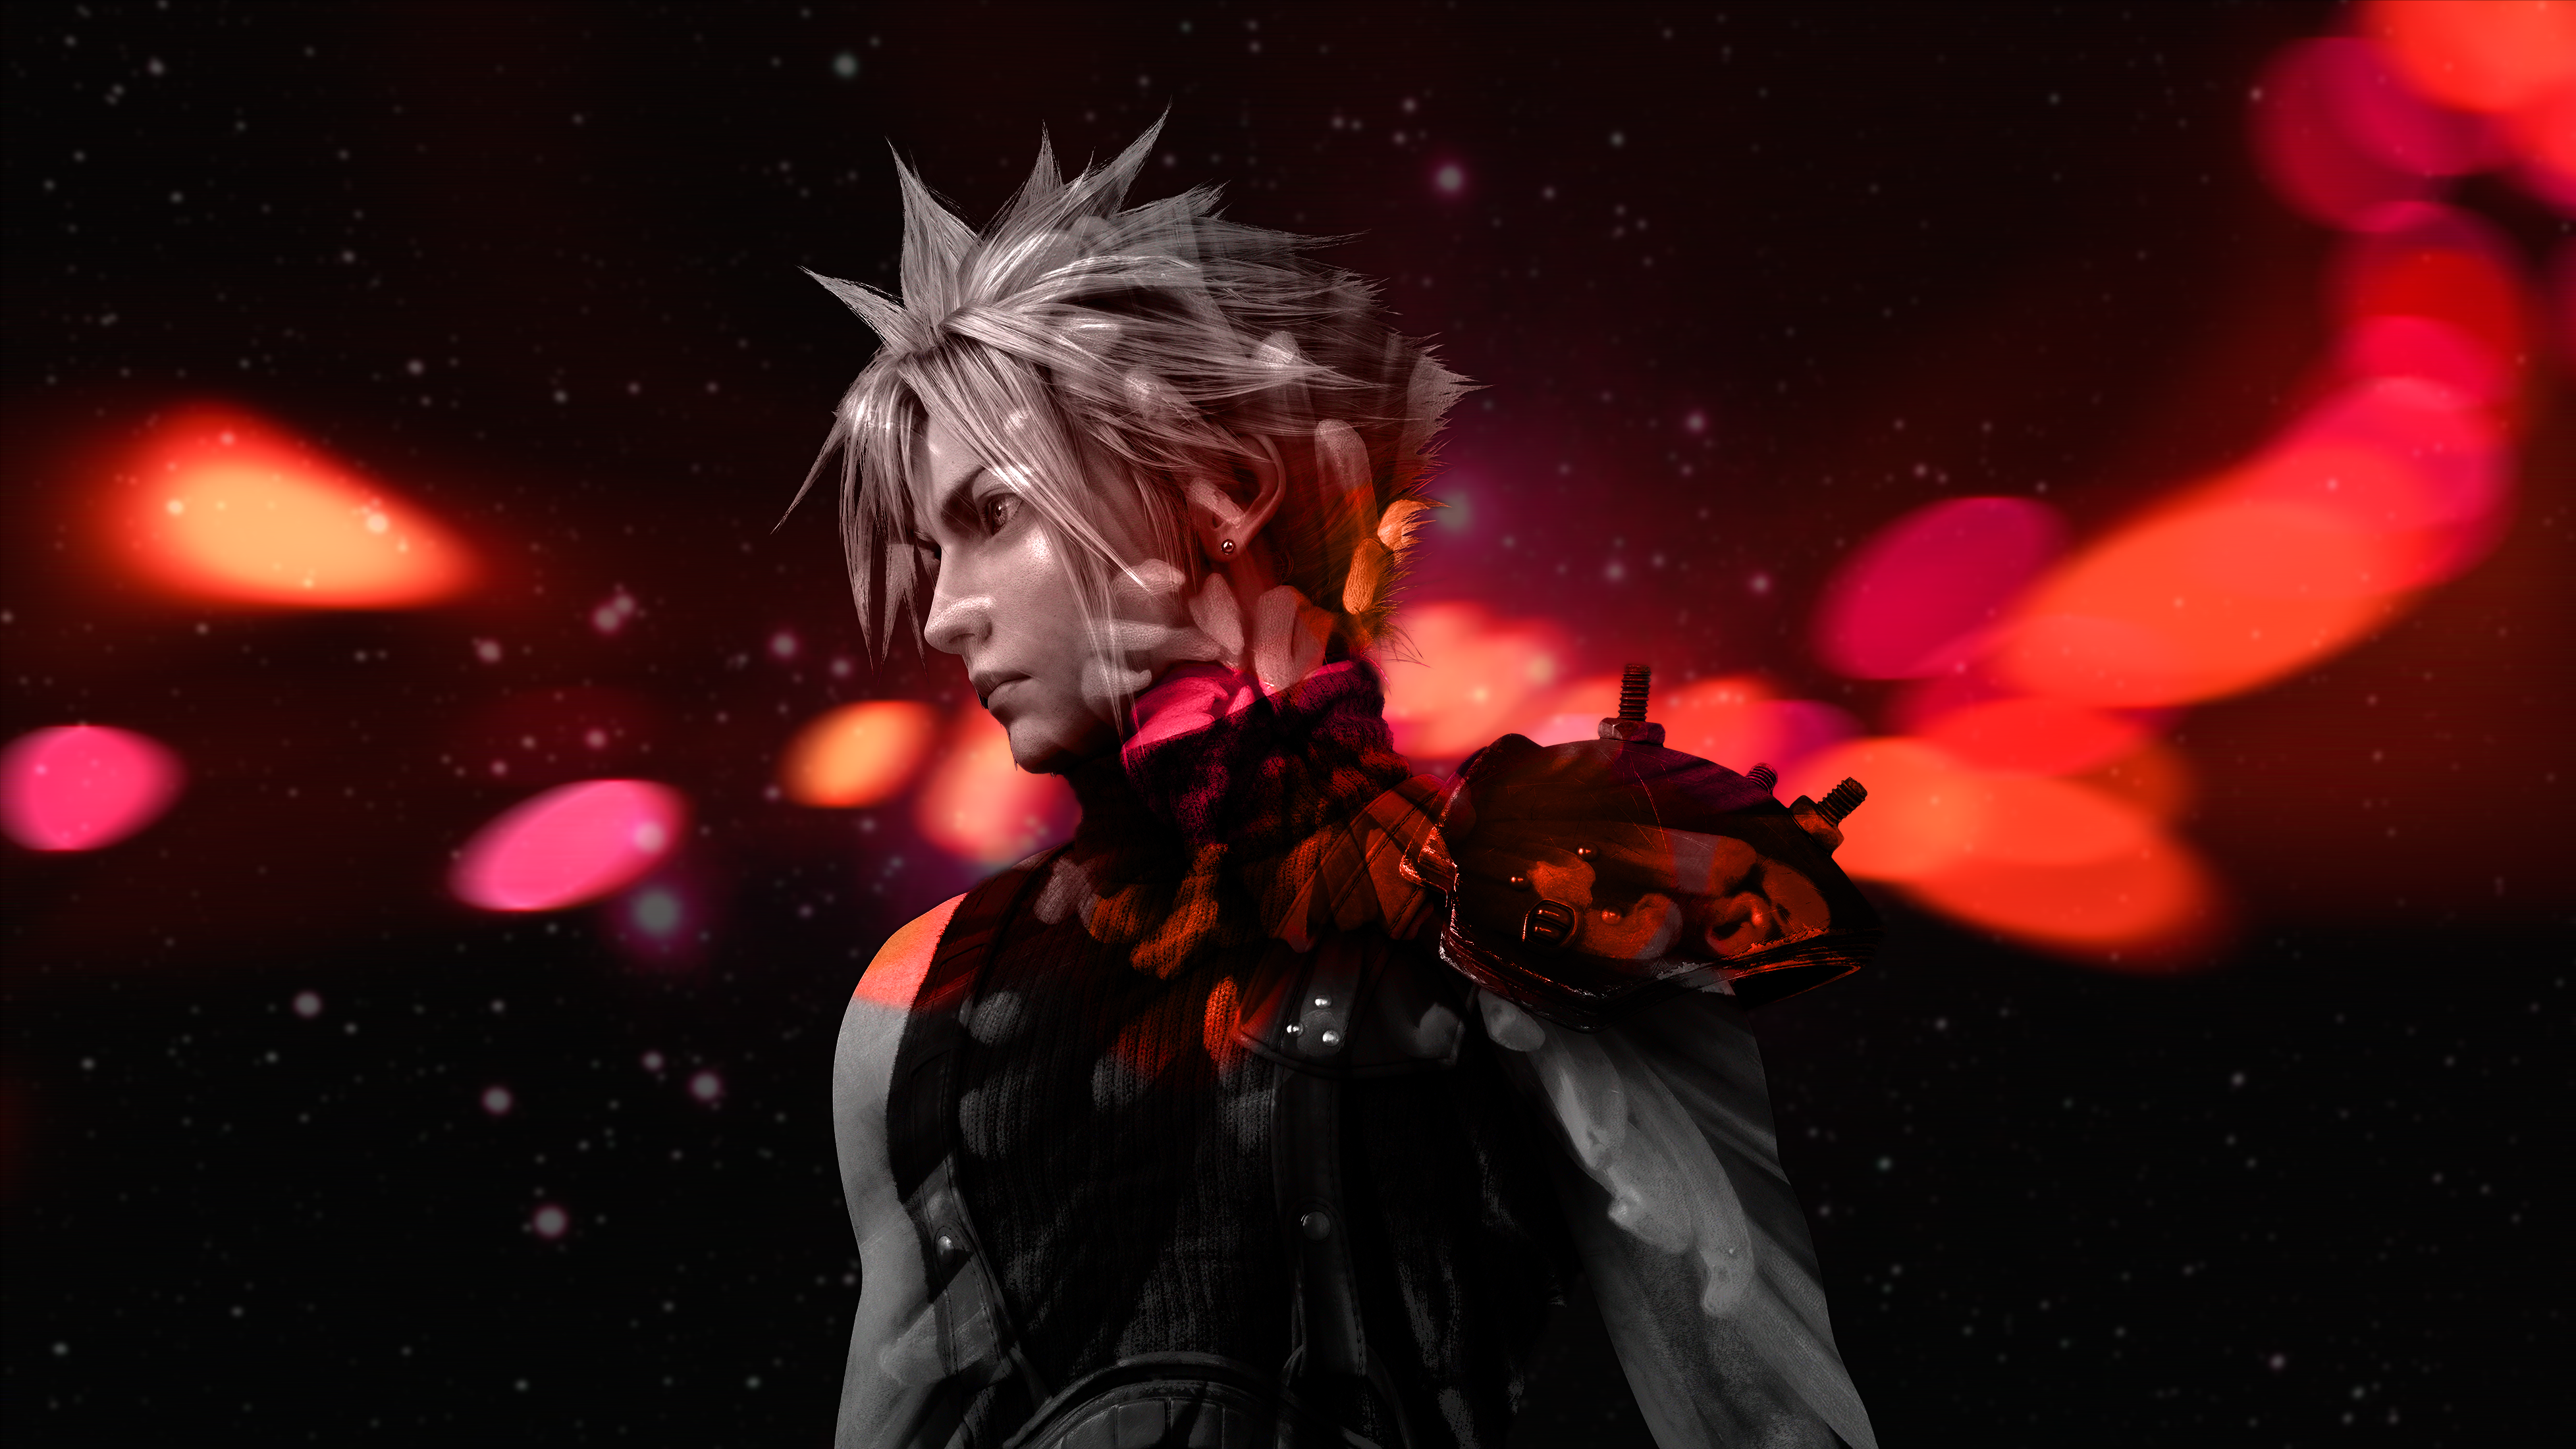 General 3912x2201 Cloud Strife Final Fantasy VII abstract photoshopped red video game characters digital art